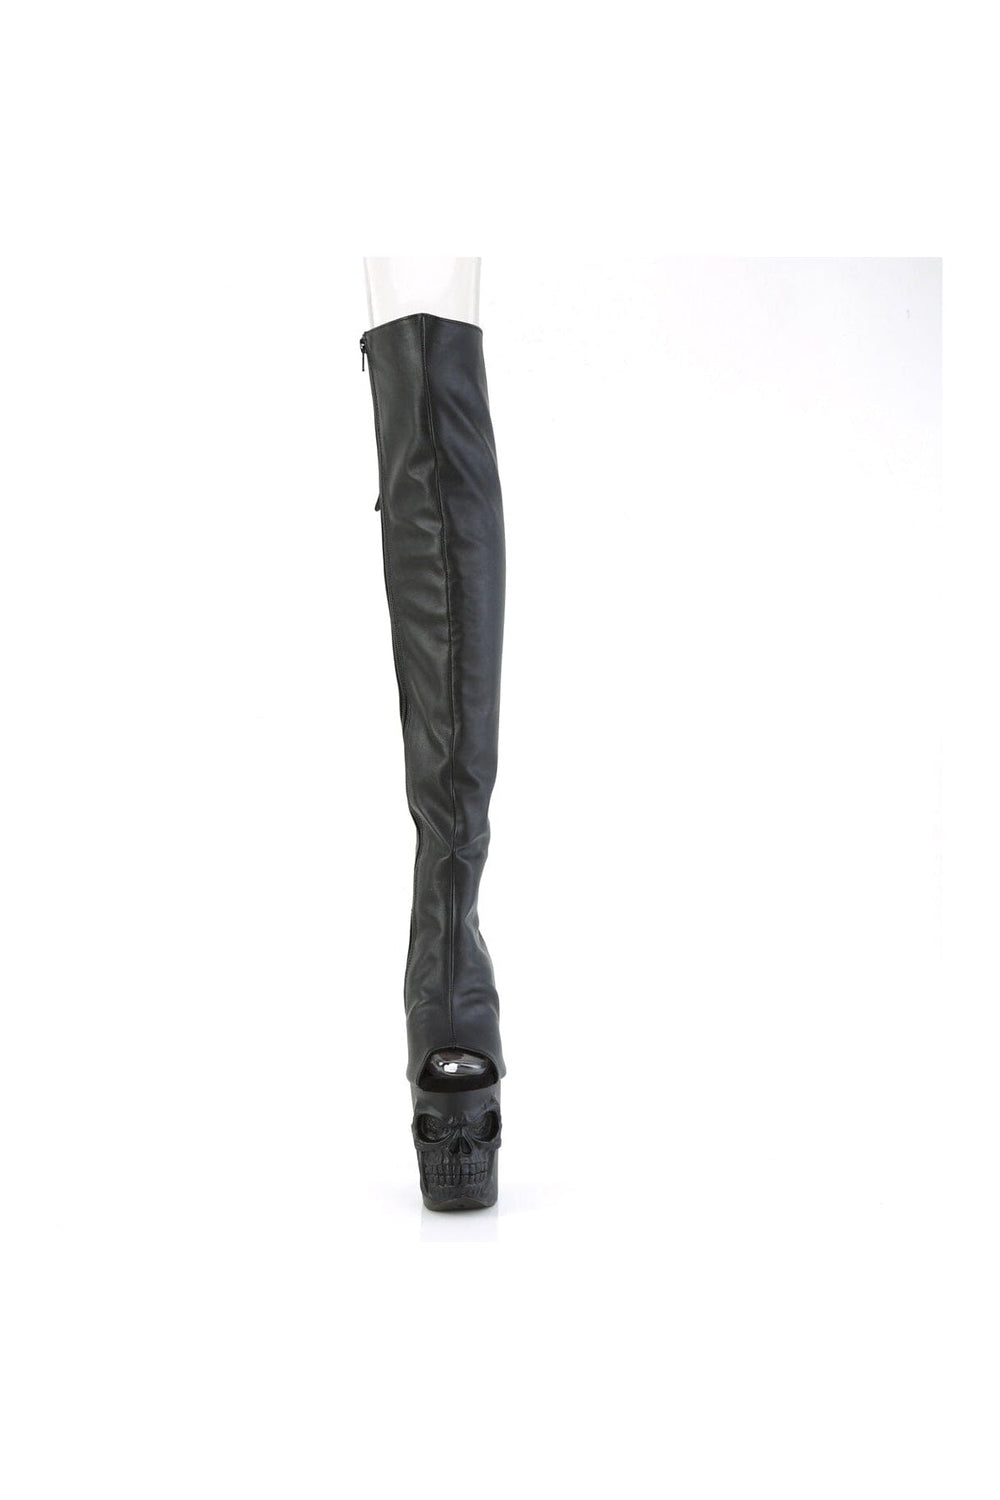 RAPTURE-3019 Black Faux Leather Knee Boot-Knee Boots-Pleaser-SEXYSHOES.COM